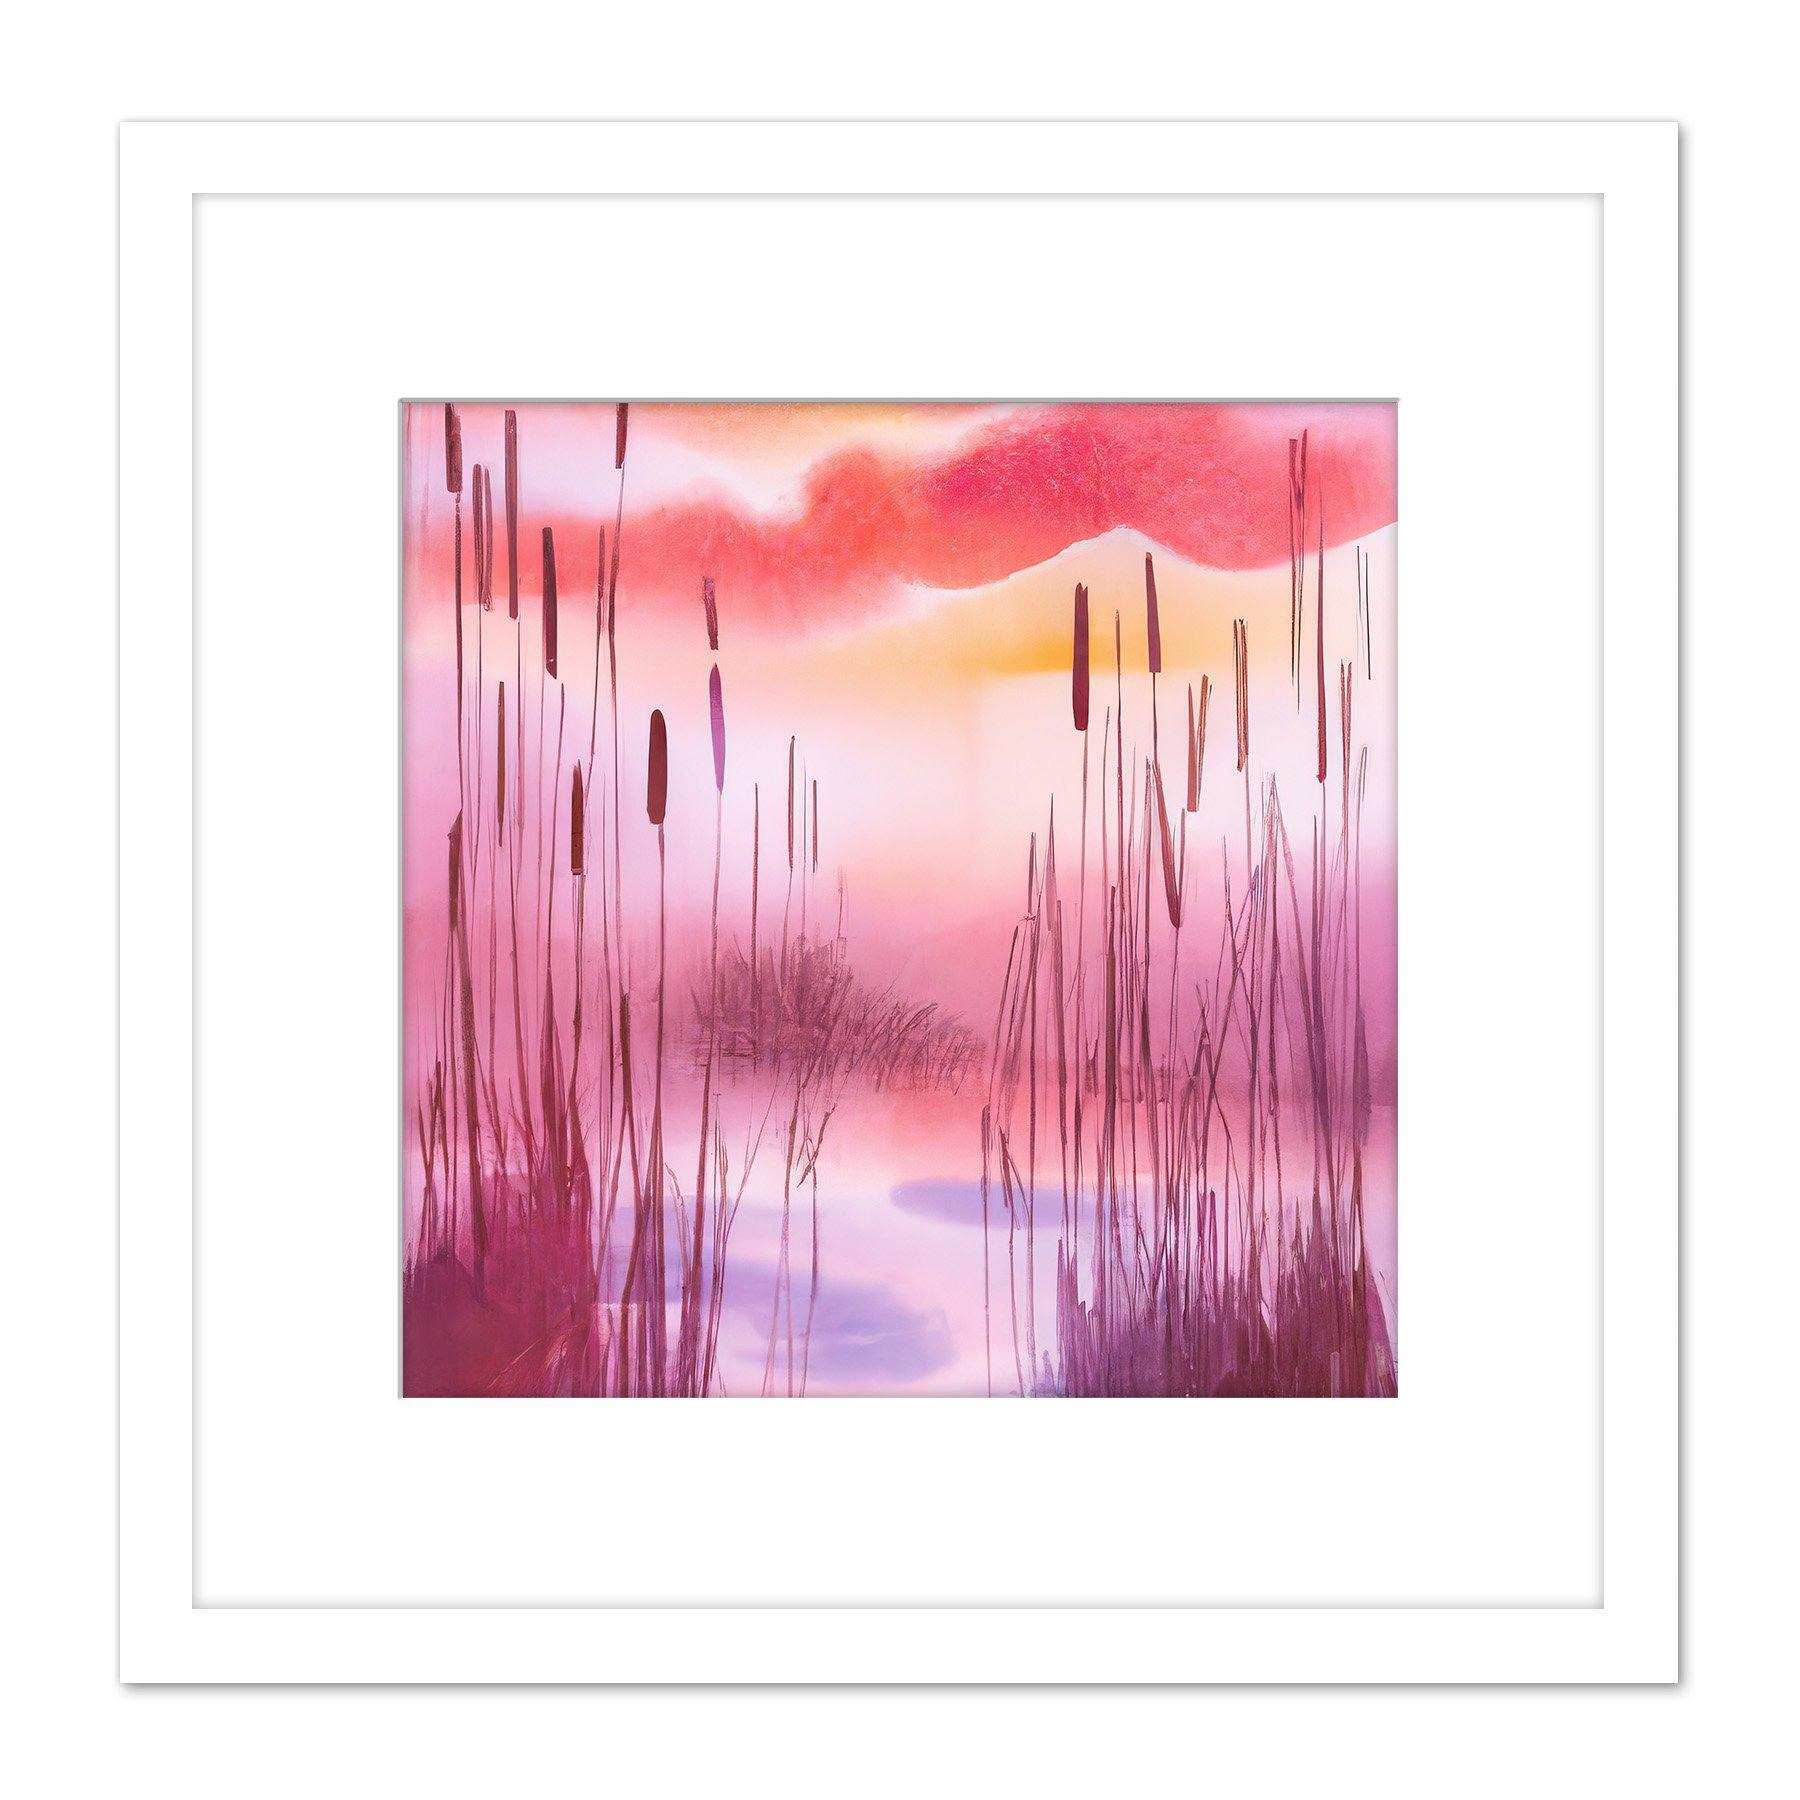 Bulrush Botanicals on Sunset Water Warm Pink Burgundy Calming Watercolour Painting Square Wooden Framed Wall Art Print Picture 8X8 Inch - image 1